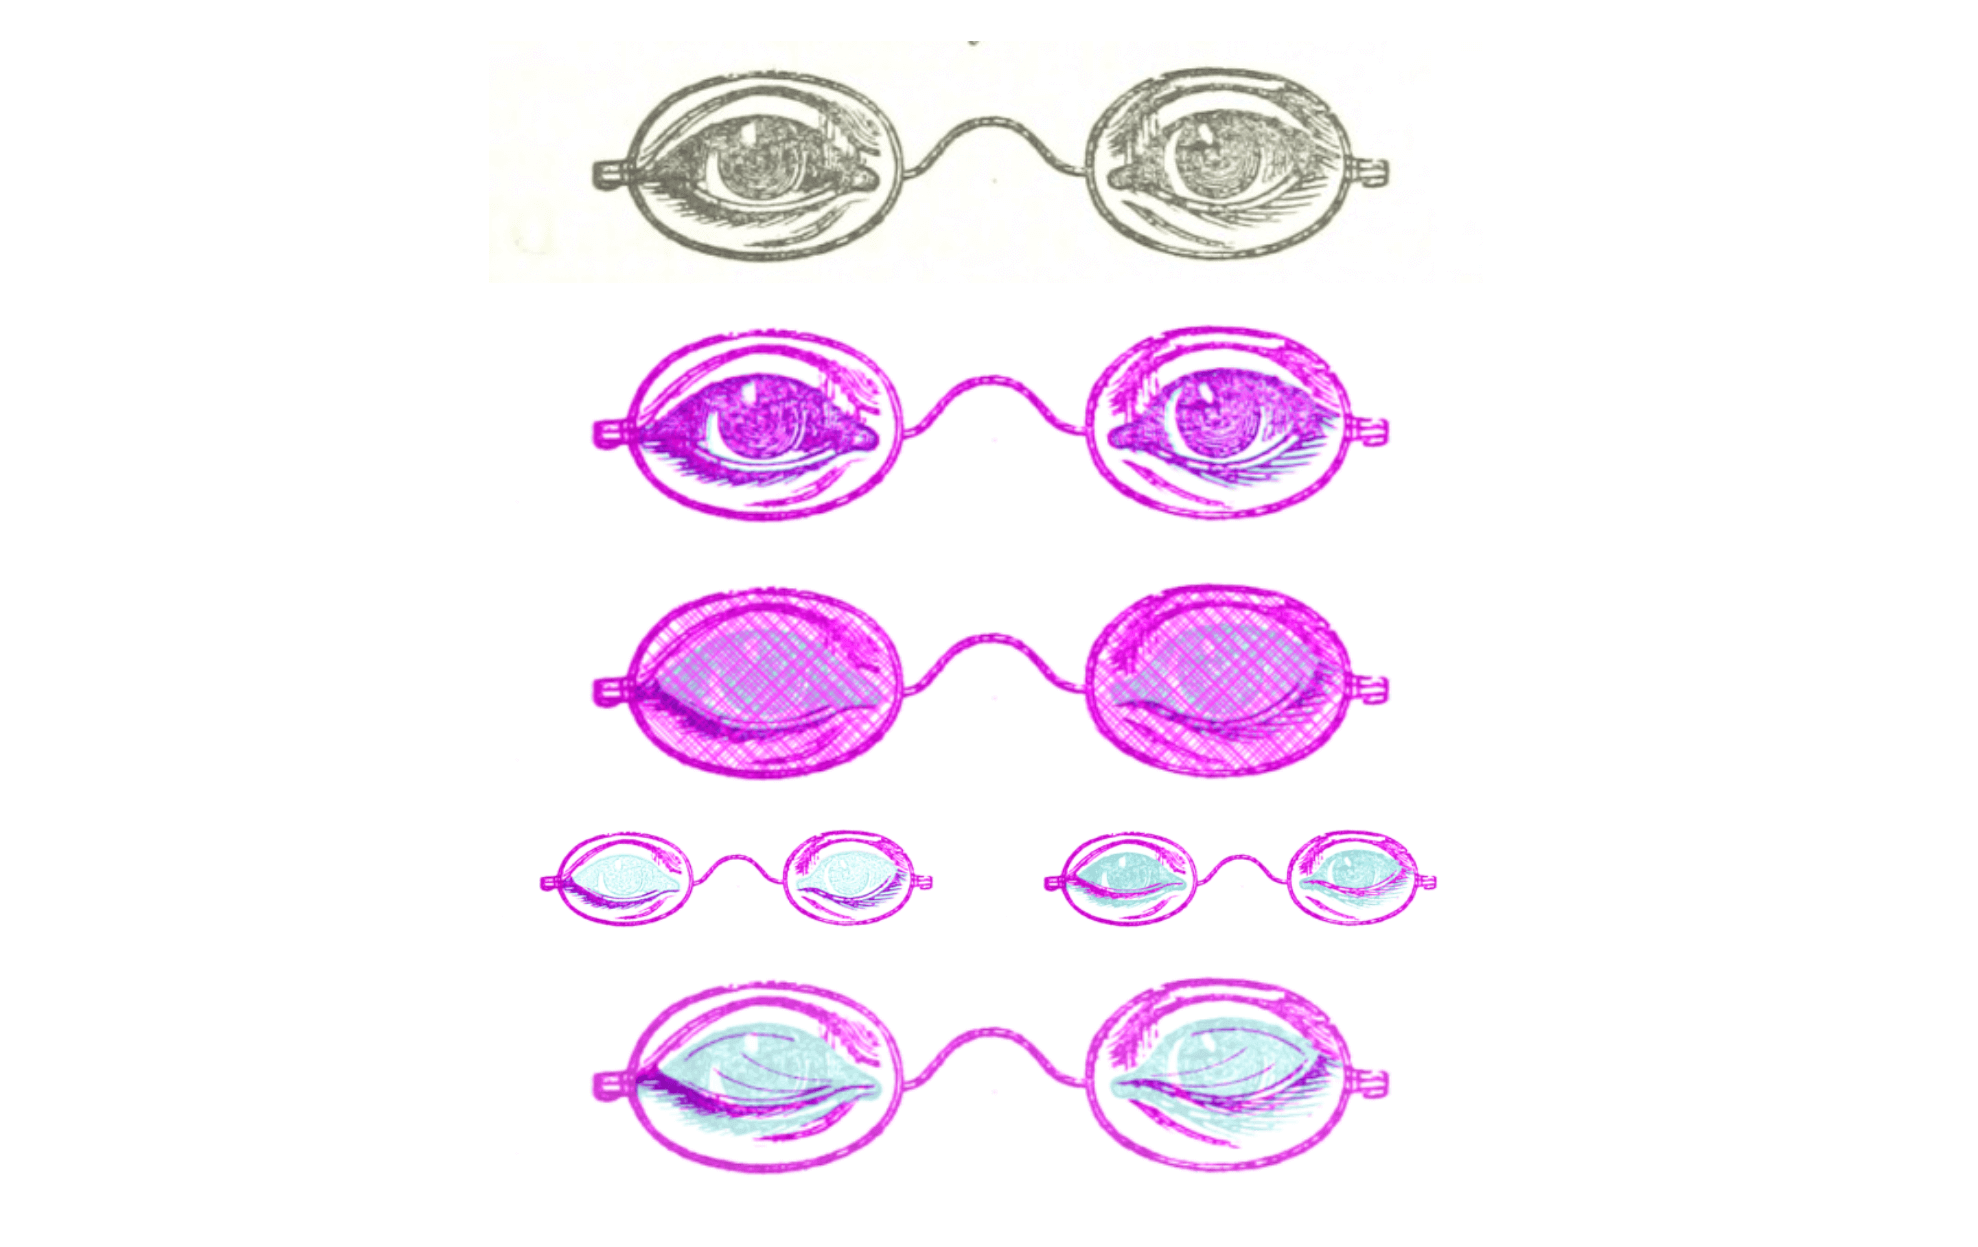 Variation tests of the red reveal effect using glasses.